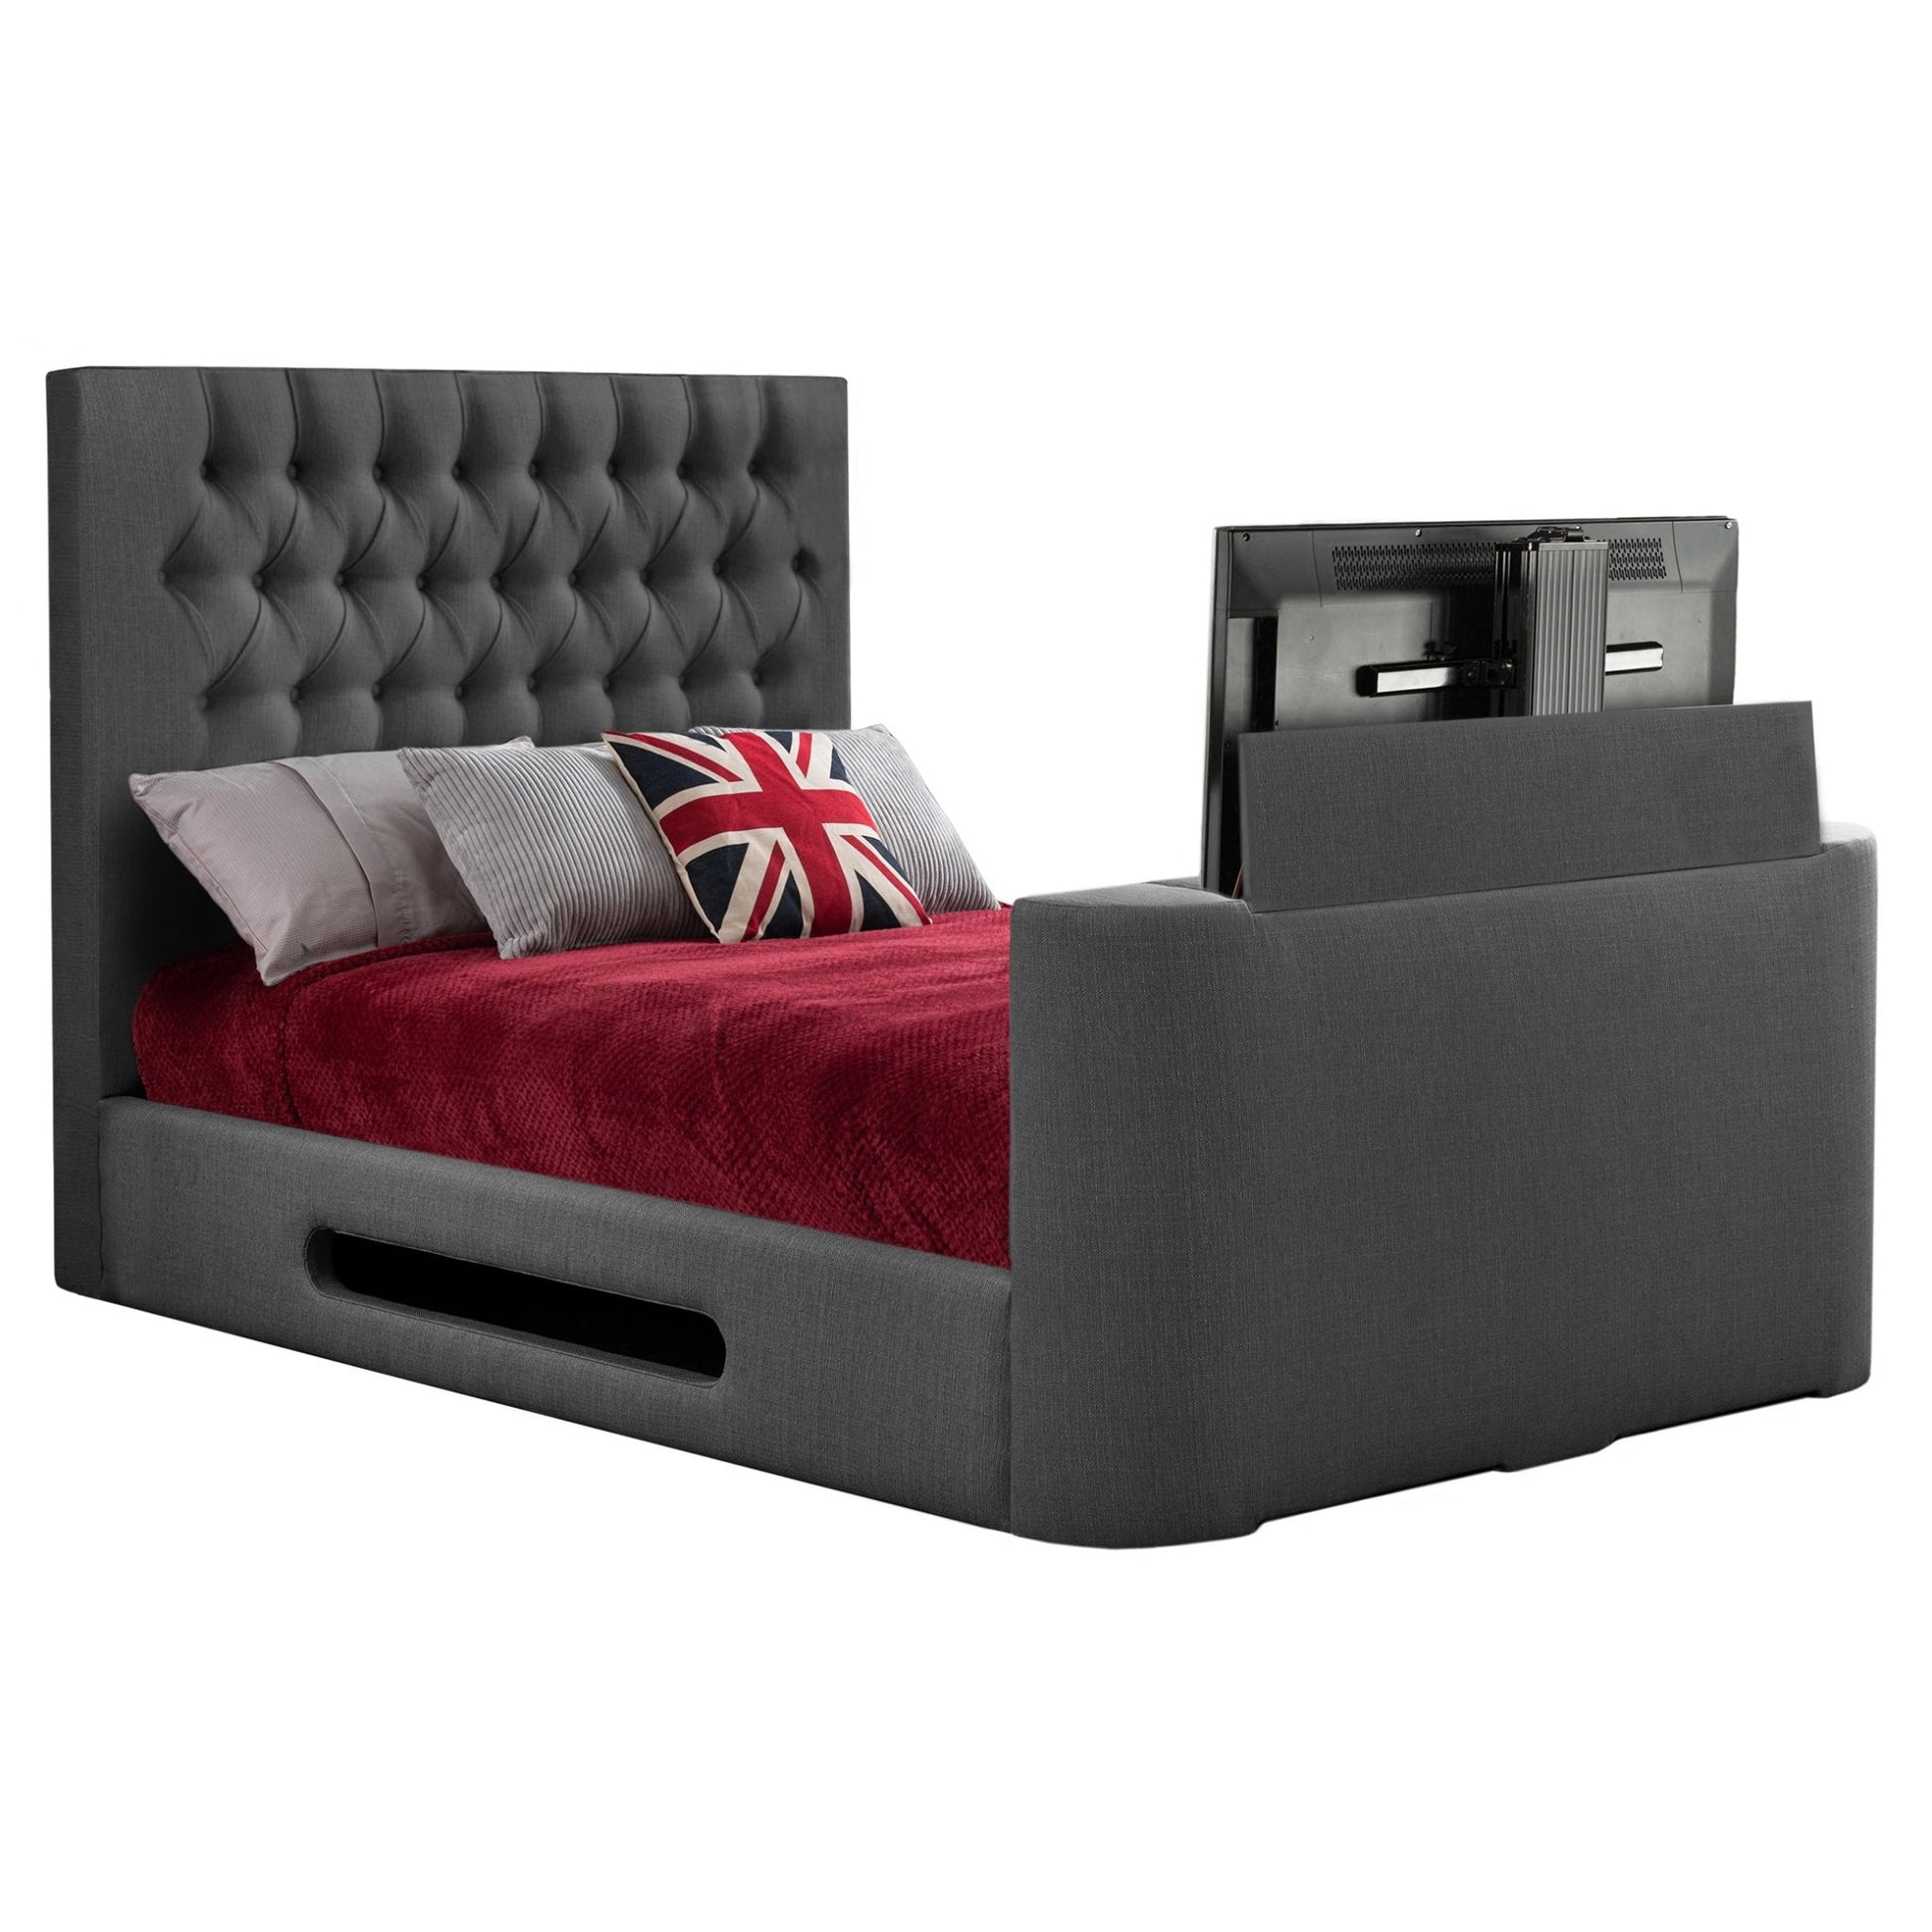 Loren Fabric TV Bed Frame - Sweet Dreams - TV Beds Northwest - SWDLORTVB - choose your colour tvbed - doubletvbed